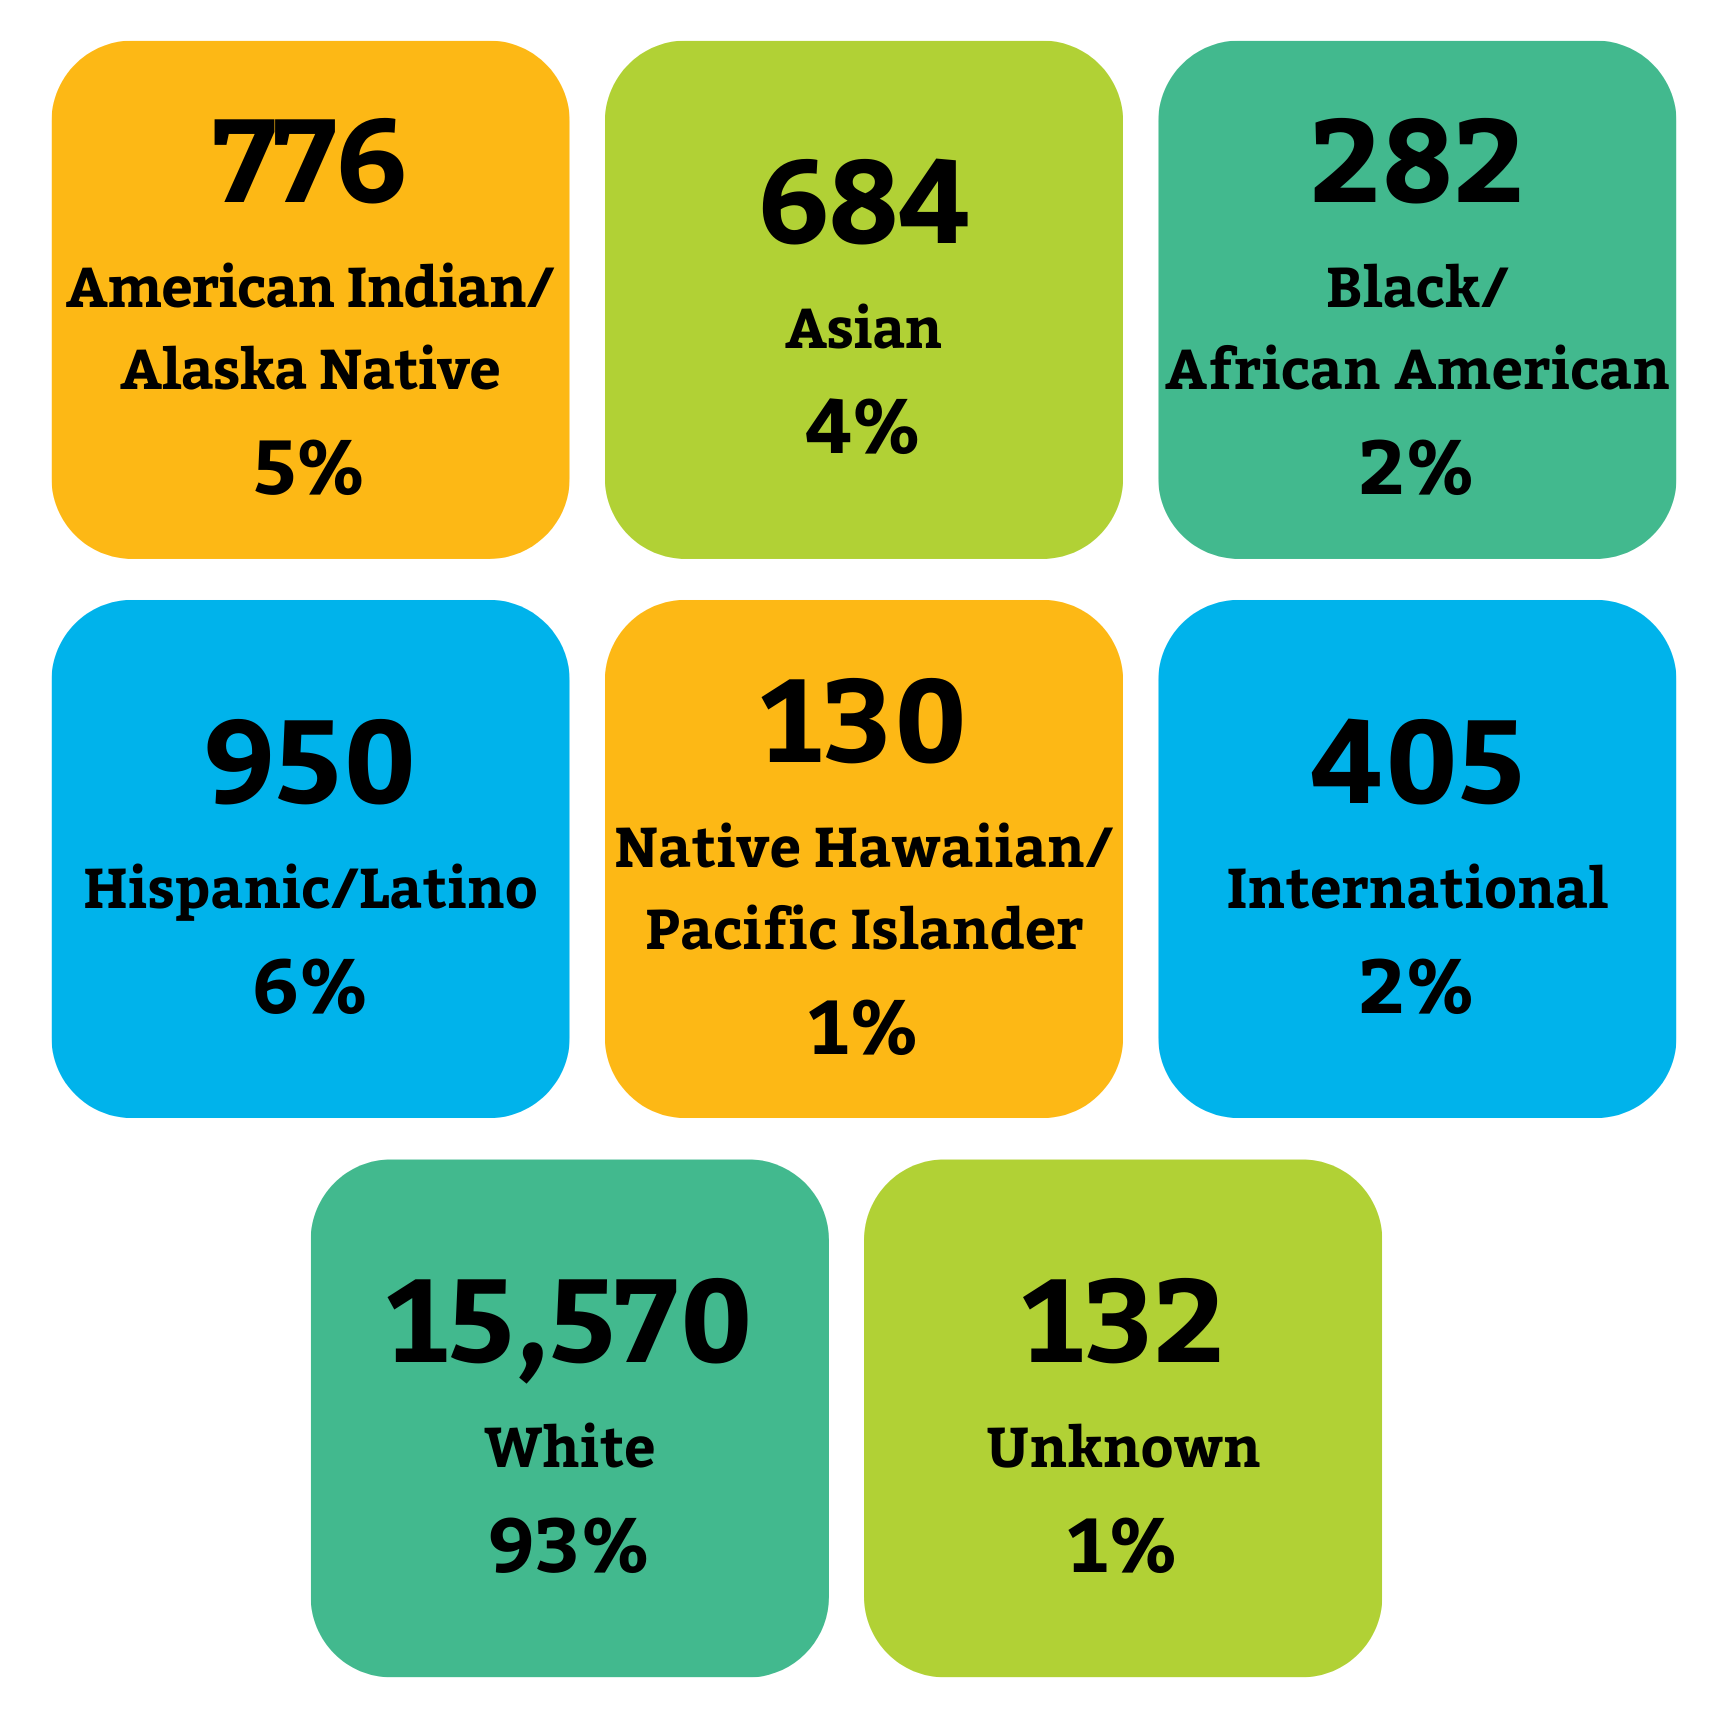 Graphic showing the demographics of students by race and ethnicity. 776 American Indian/Alaska Native (5%), 684 Asian (4%), 282 Black/African American (2%), 950 Hispanic/Latino (6%), 130 Native Hawaiian/Pacific Islander (1%), 405 International (2%), 15,570 White (93%), and 132 Unknown (1%).